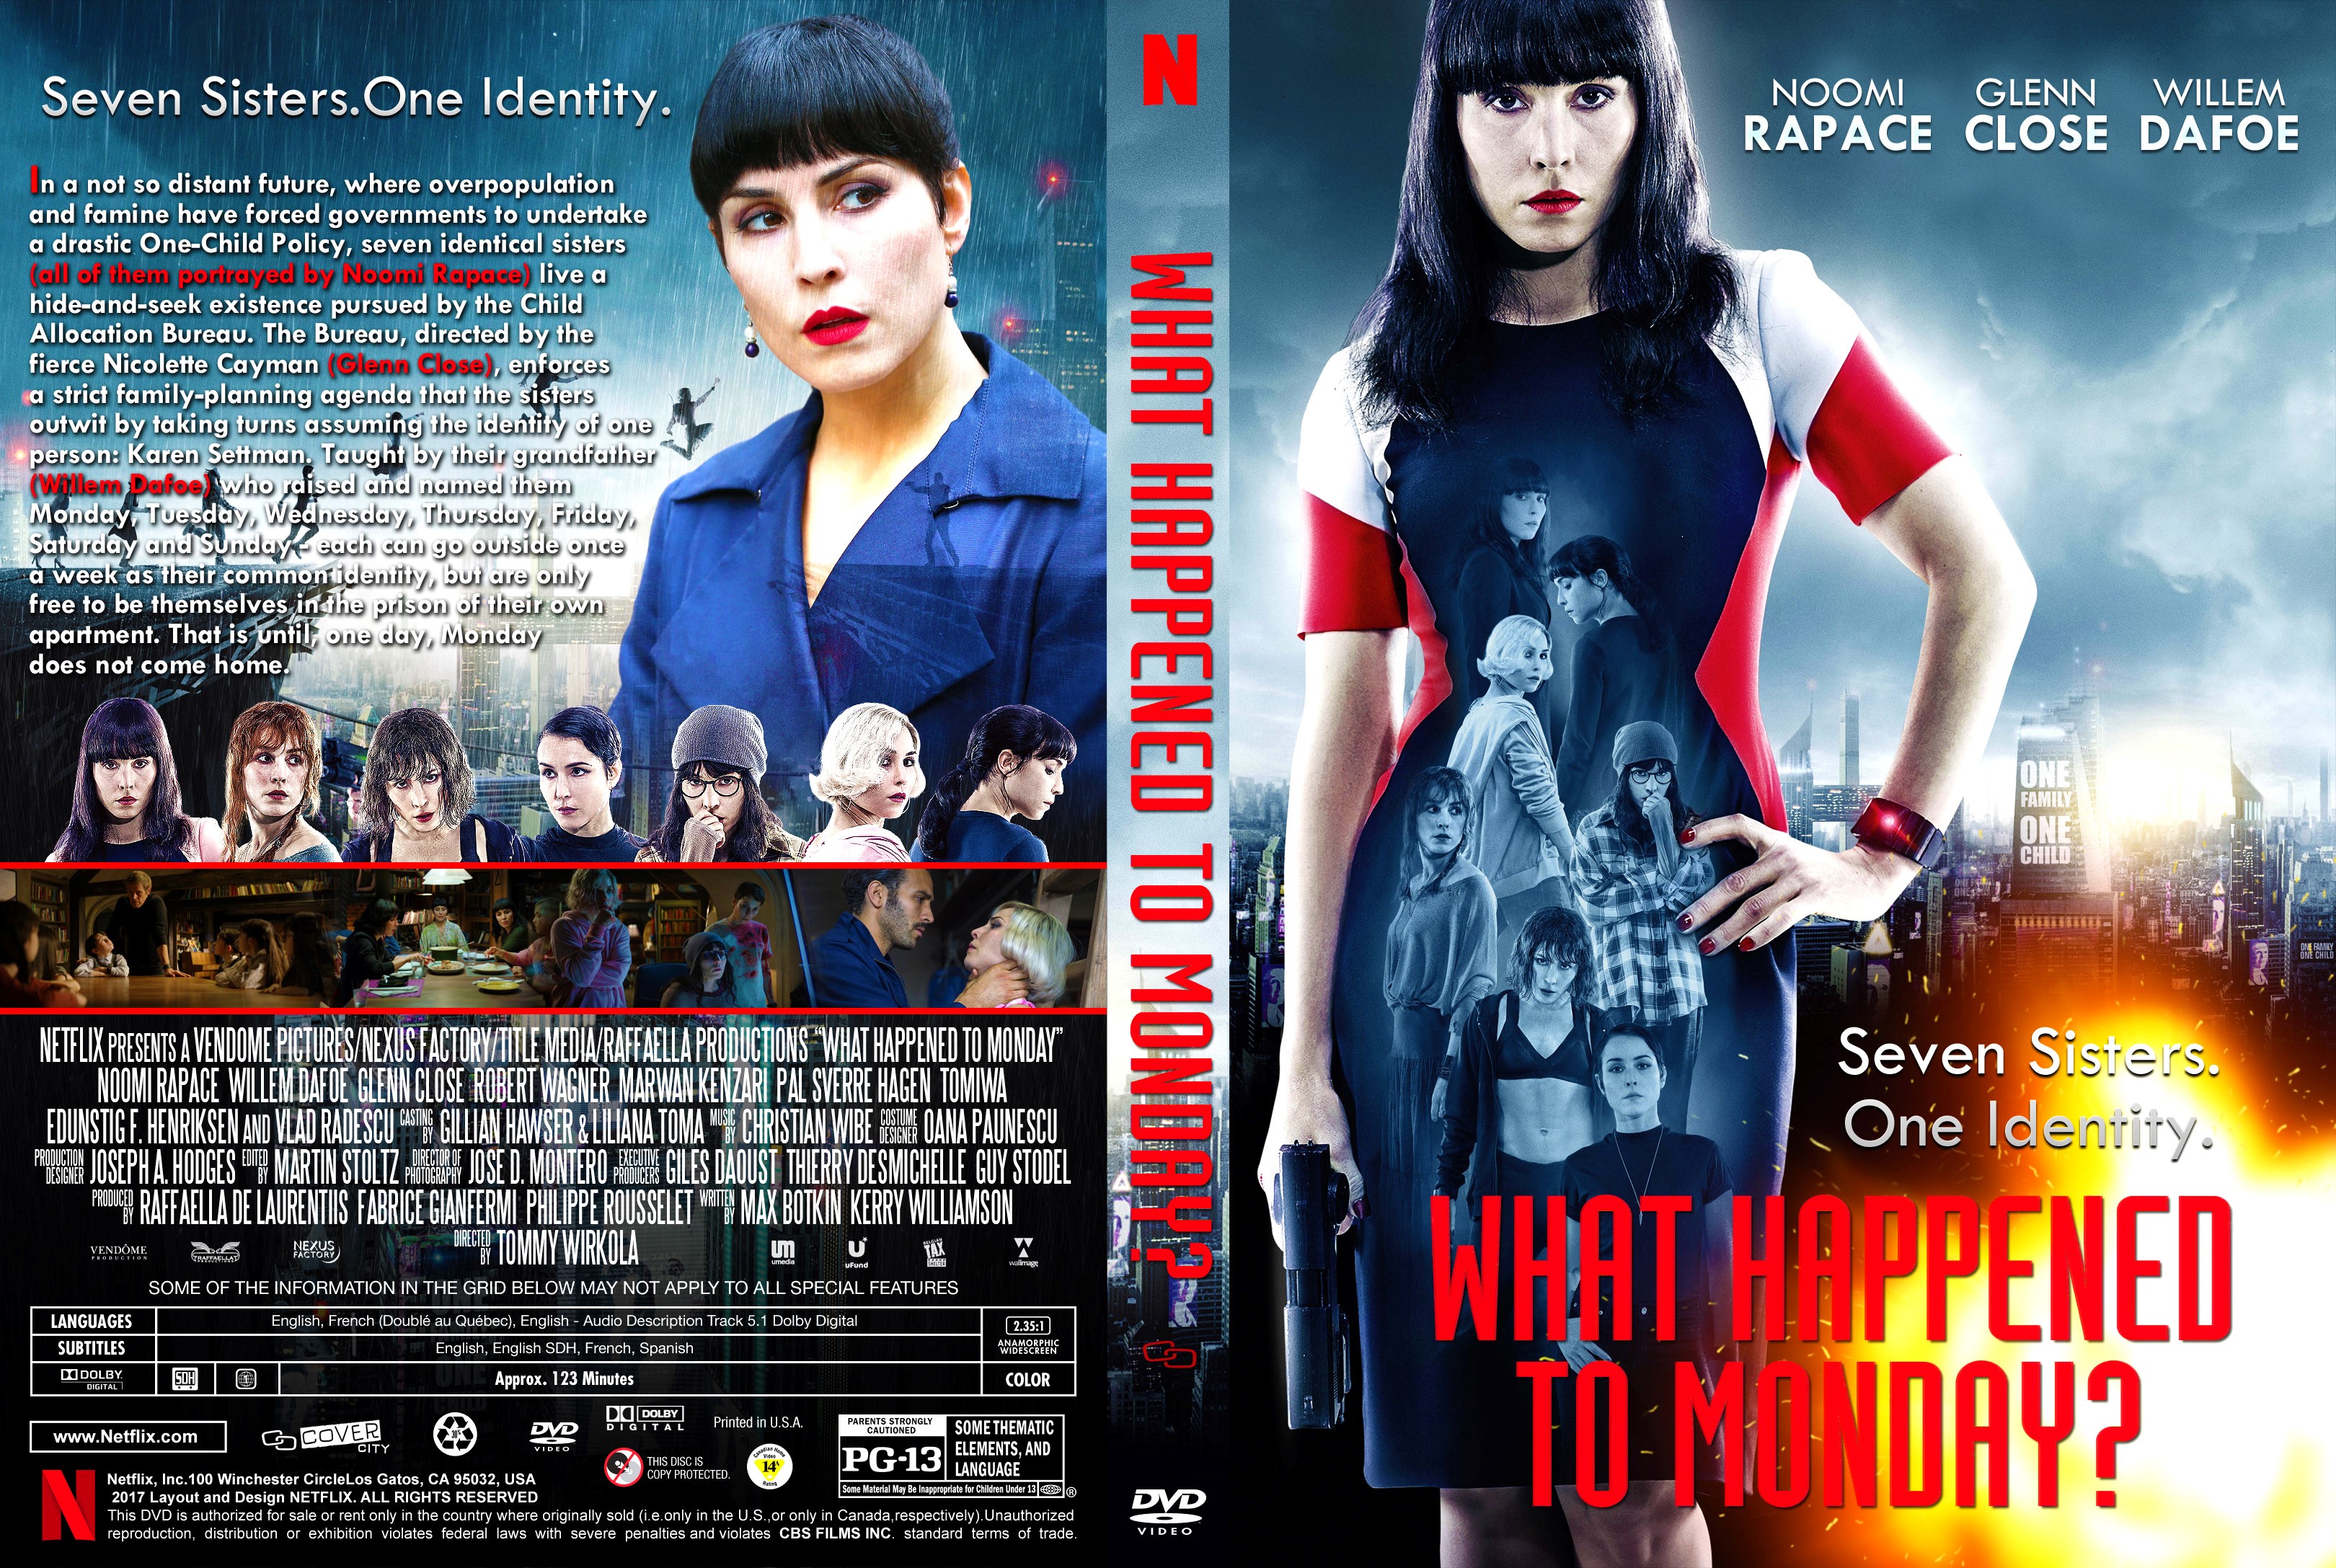 What Happened To Monday? (a.k.a.Seven Sisters) DVD Cover.